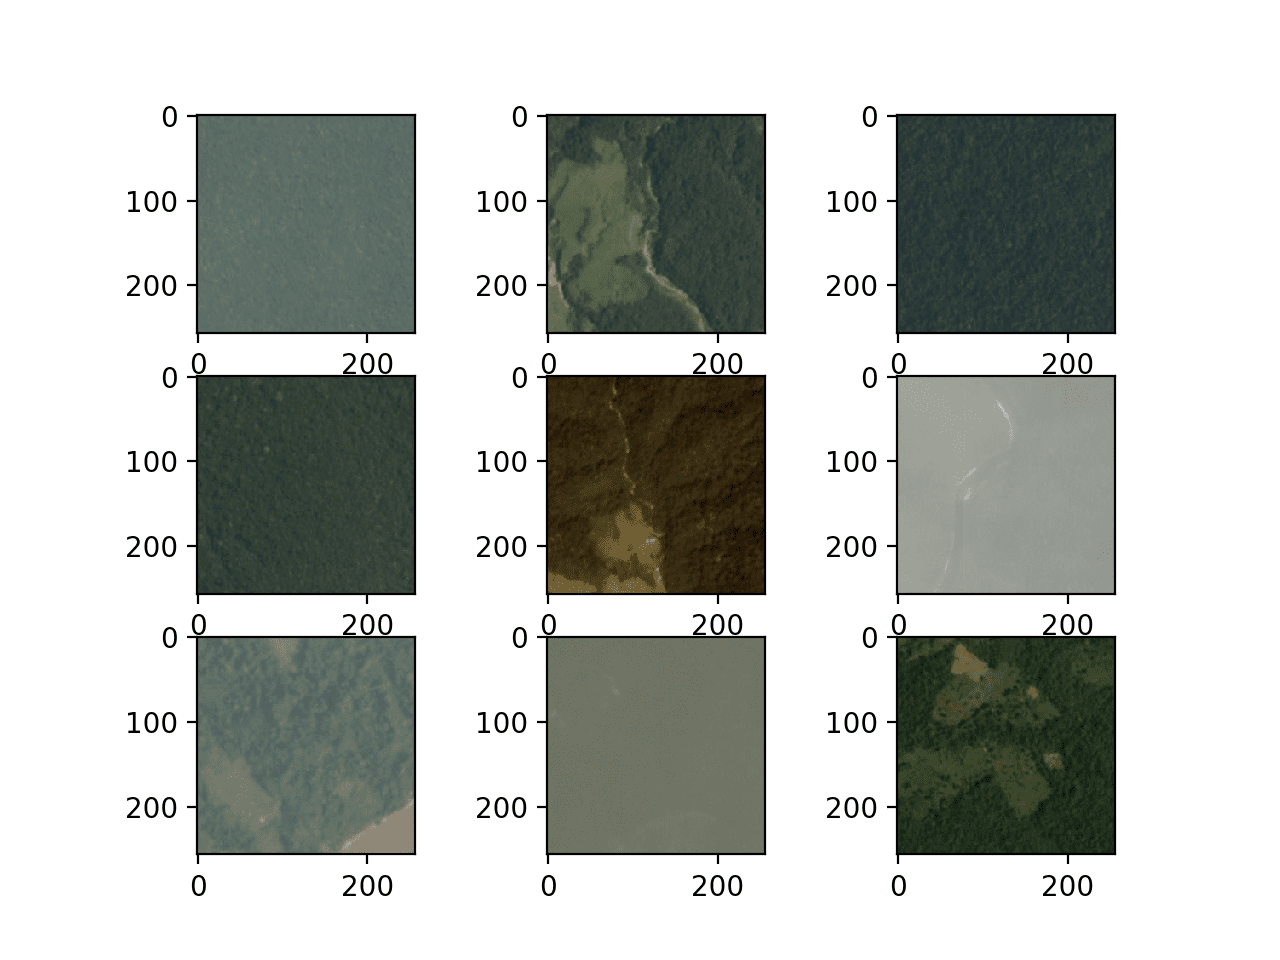 Figure Showing the First Nine Images From the Planet Dataset